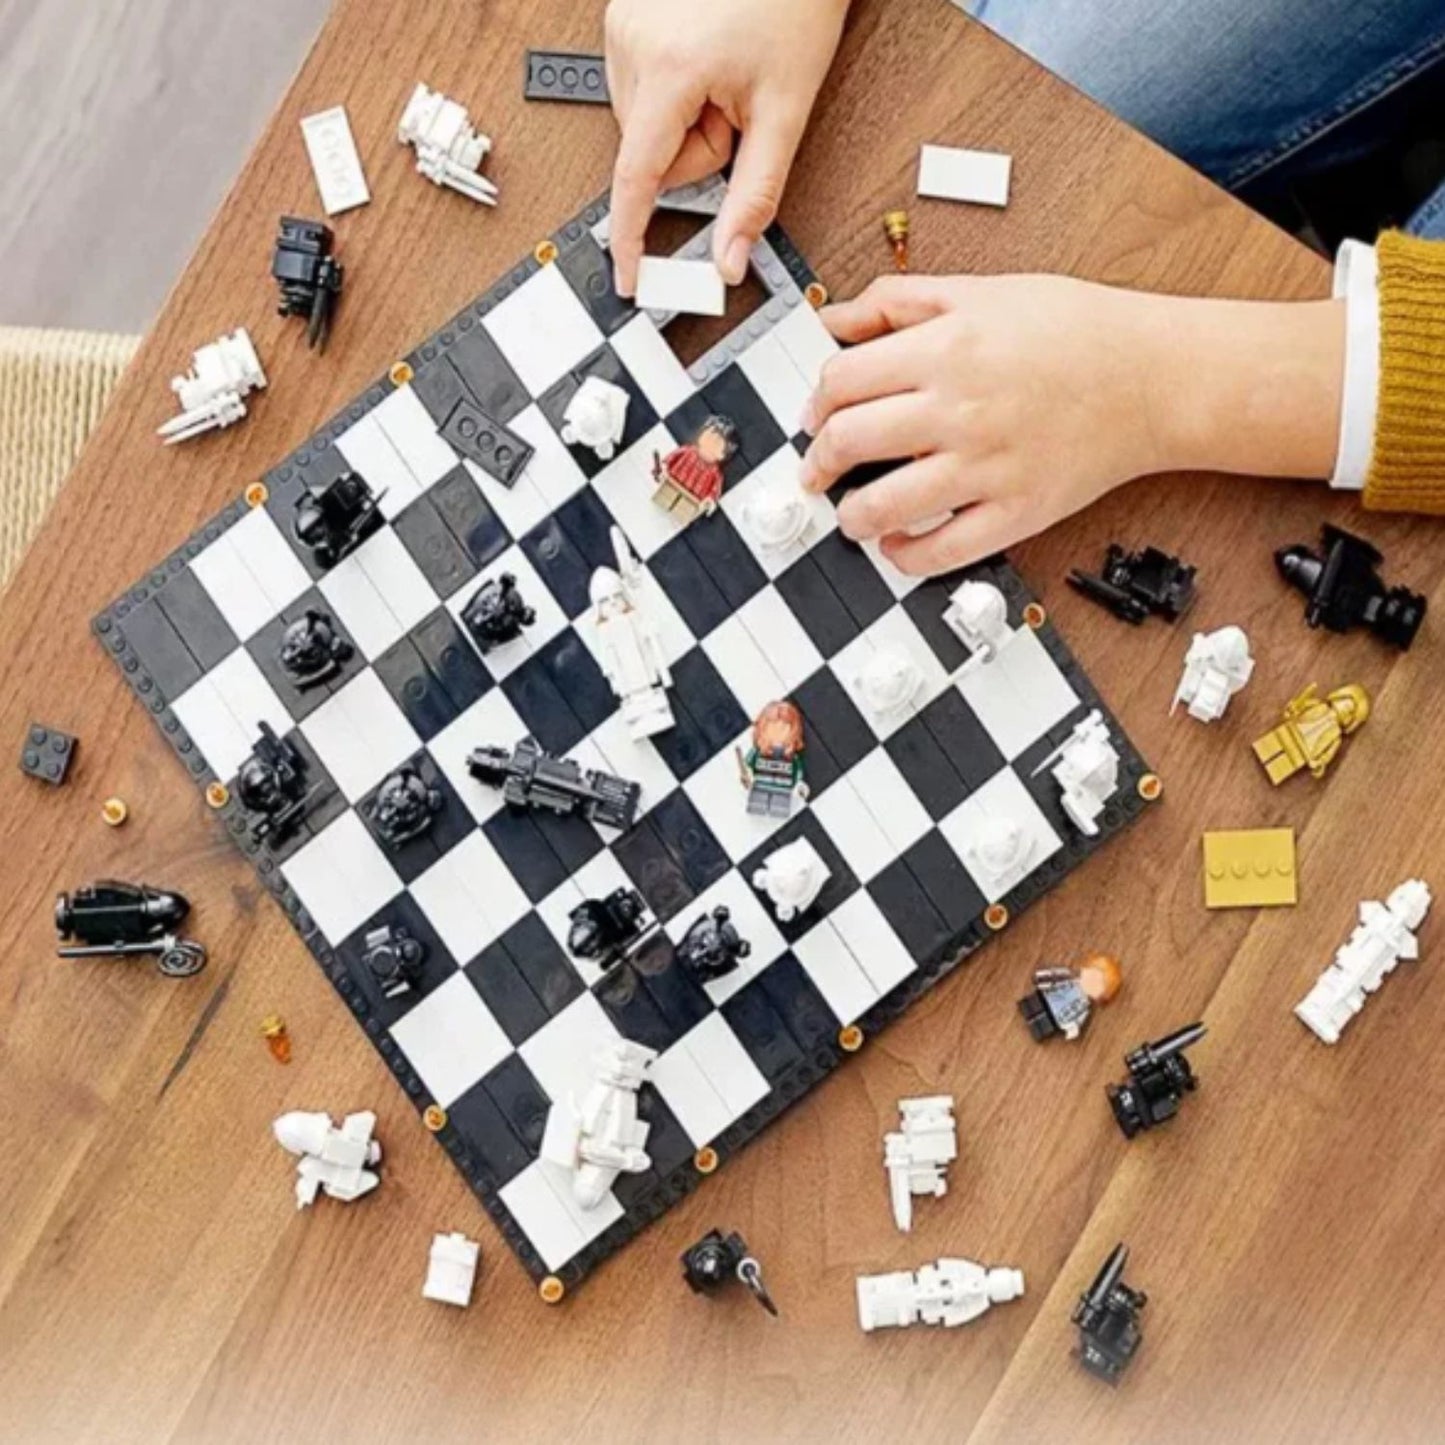 Chess Building Block game